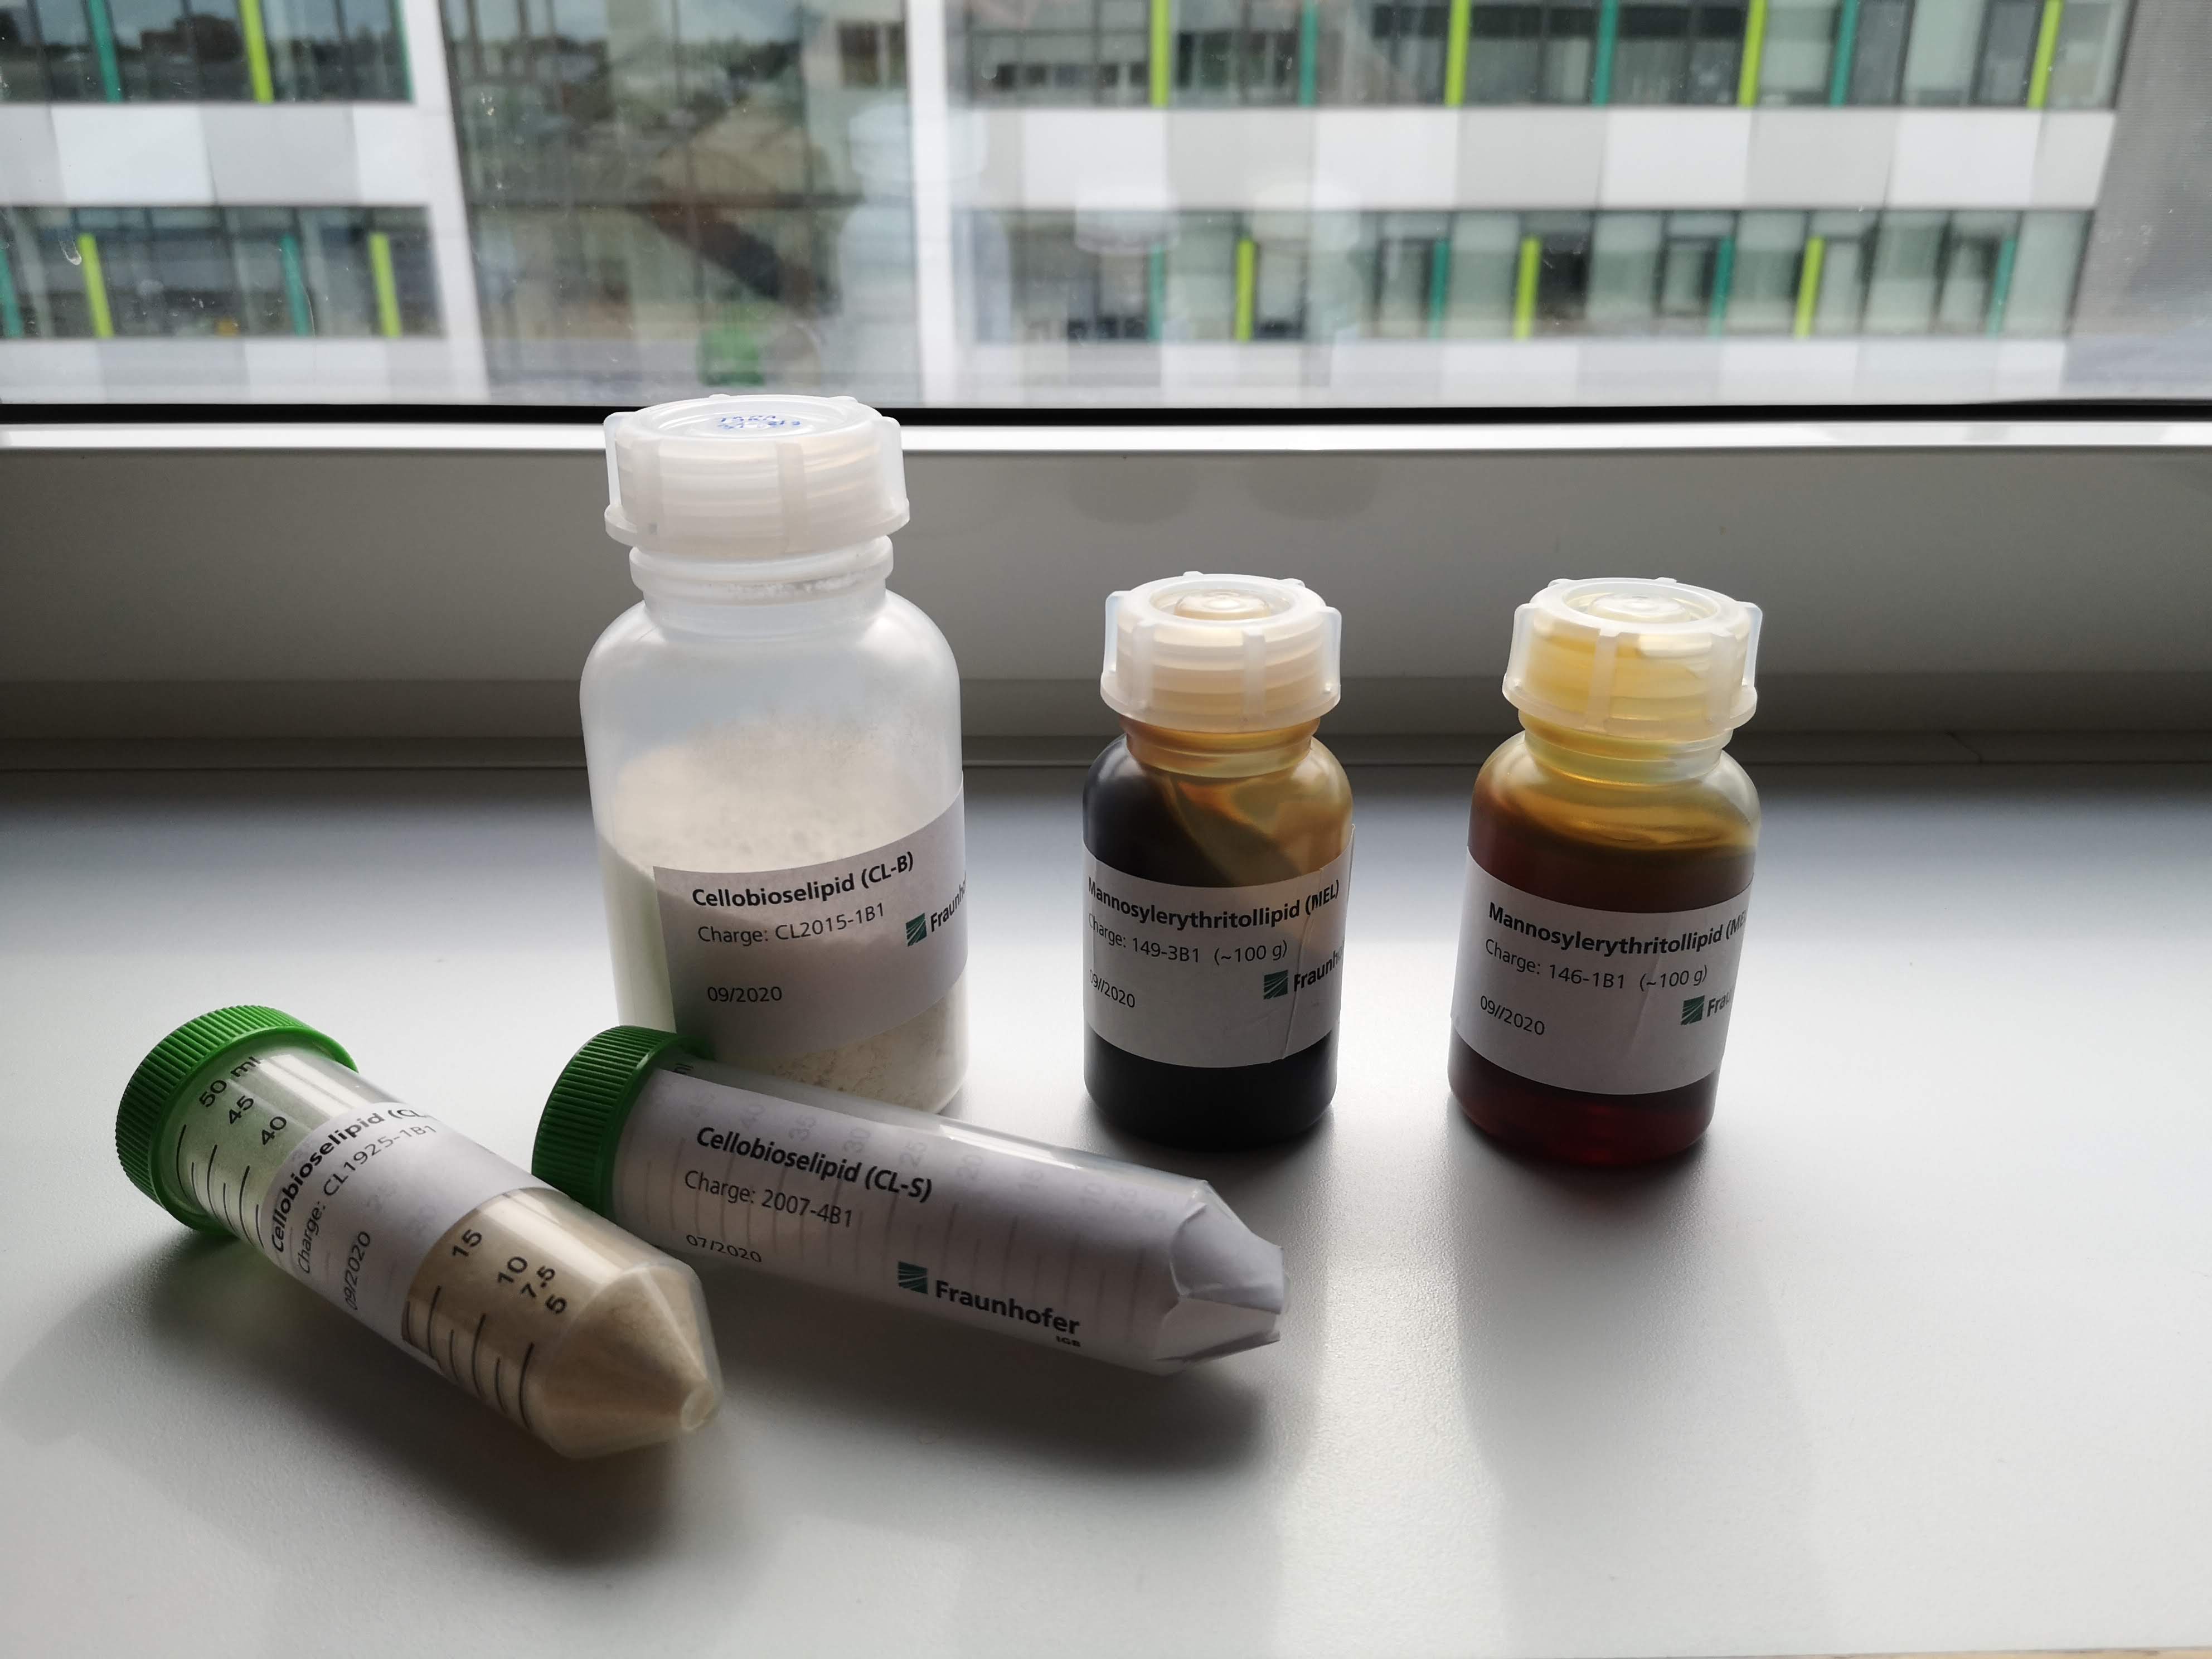 Samples of different cellobiose- and mannosylerythritol lipid variants ready for shipment.